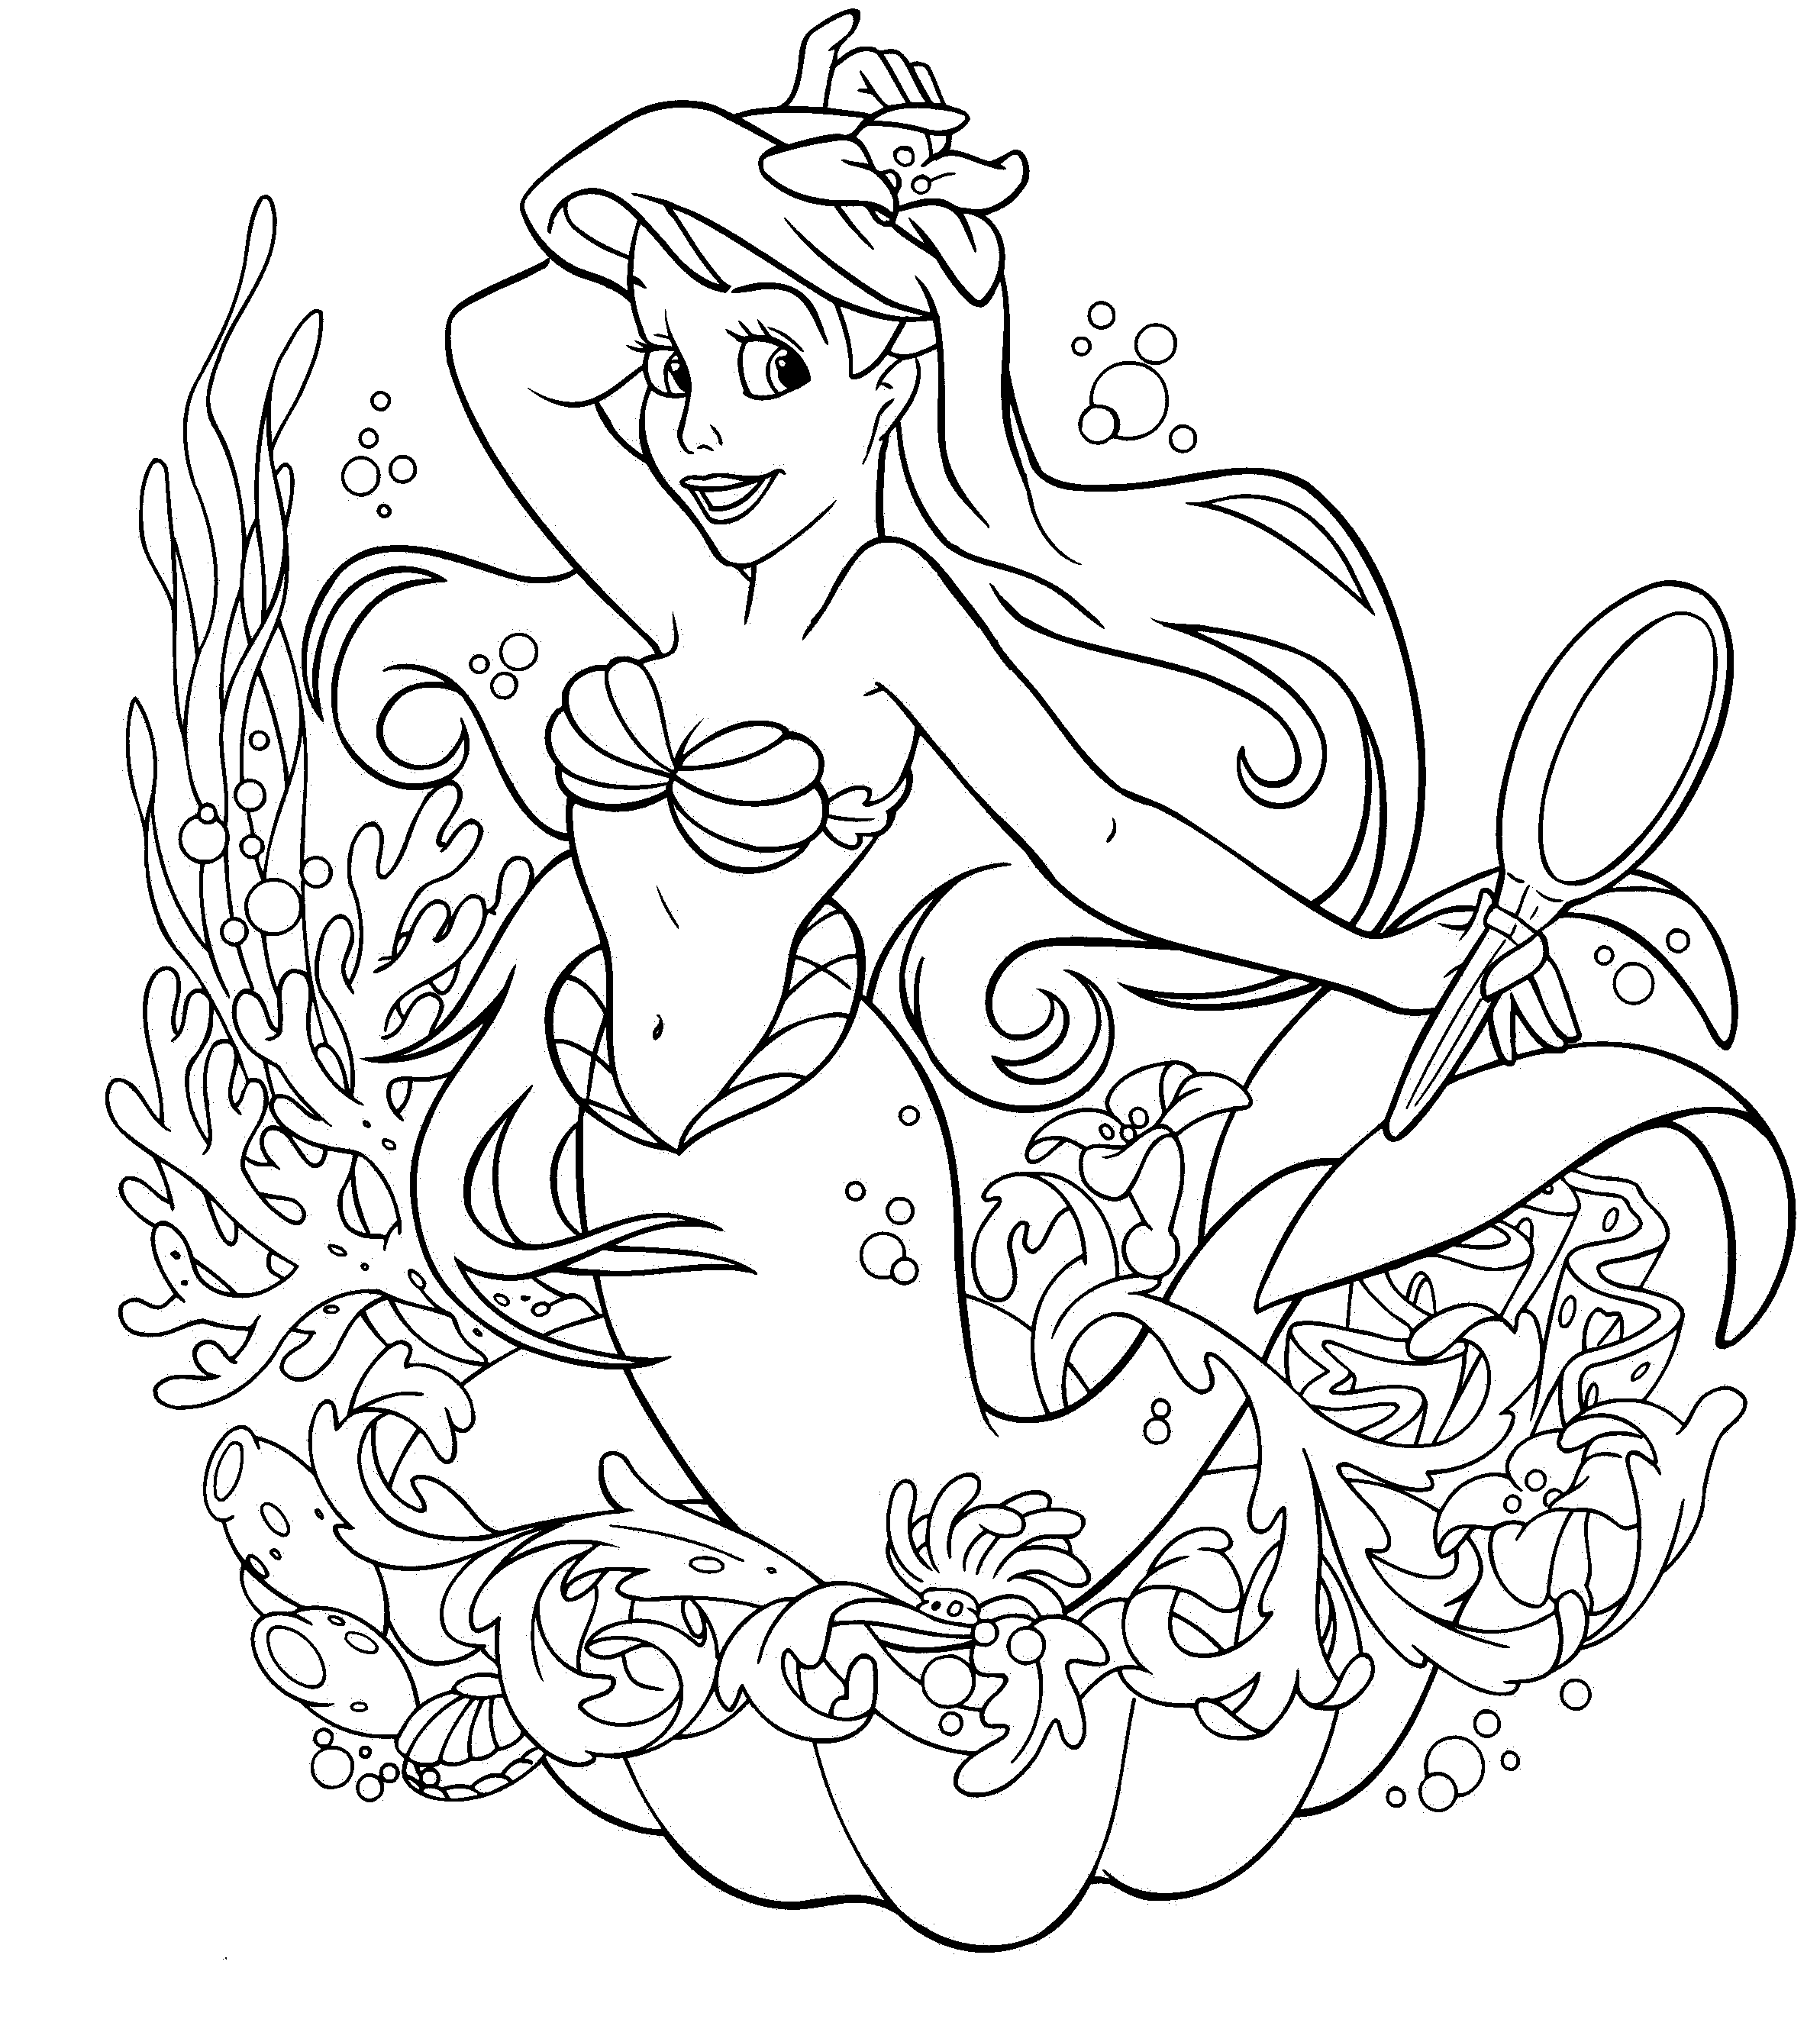 Free Printable Coloring Pages For Kids Disney Amazing Of Disney ...